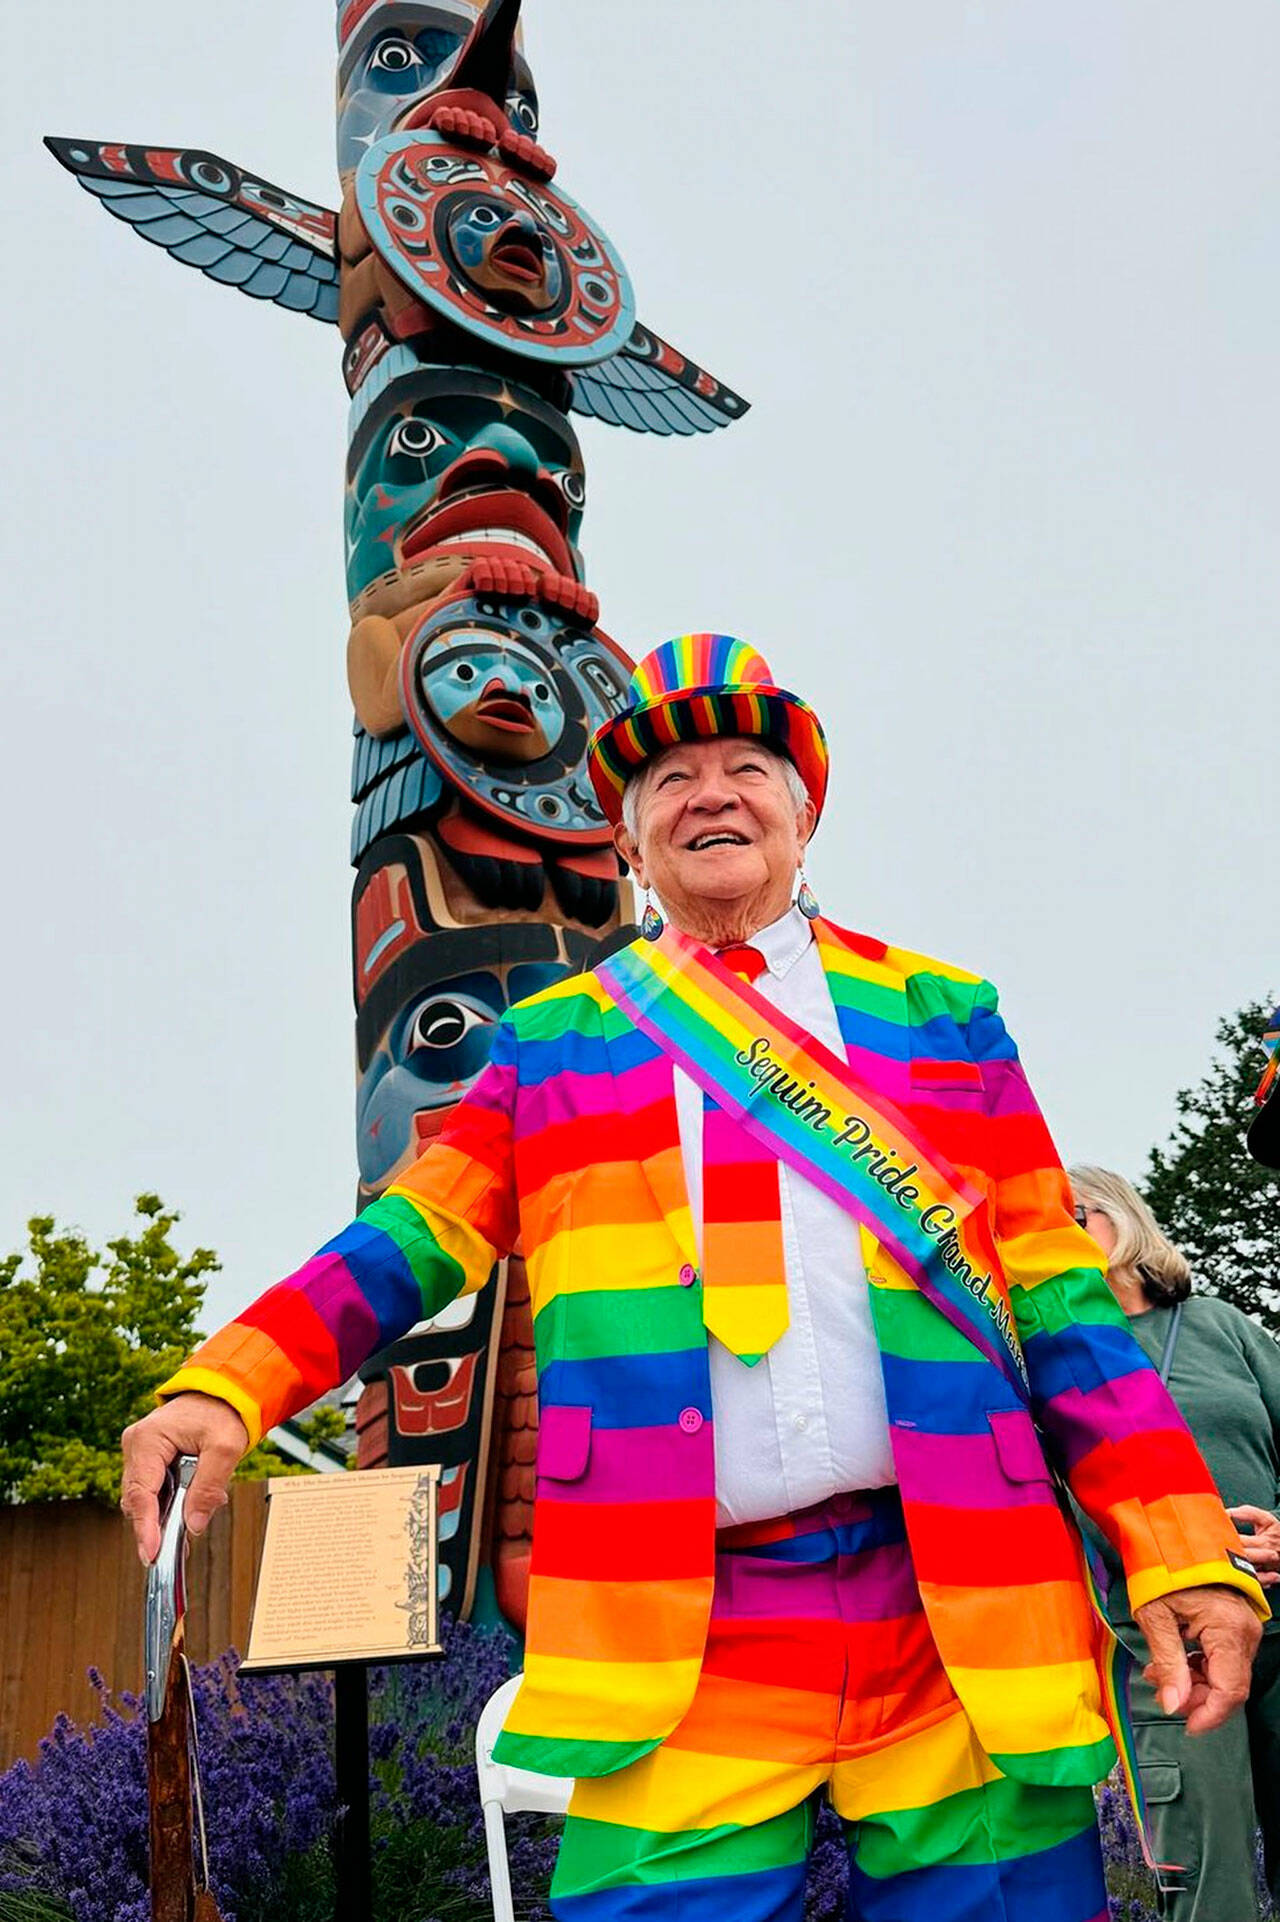 Photo courtesy David Owen Hastings
Michael Lowe, grand marshal of Sequim Pride, stands by the totem pole during the event on June 29 in downtown Sequim.